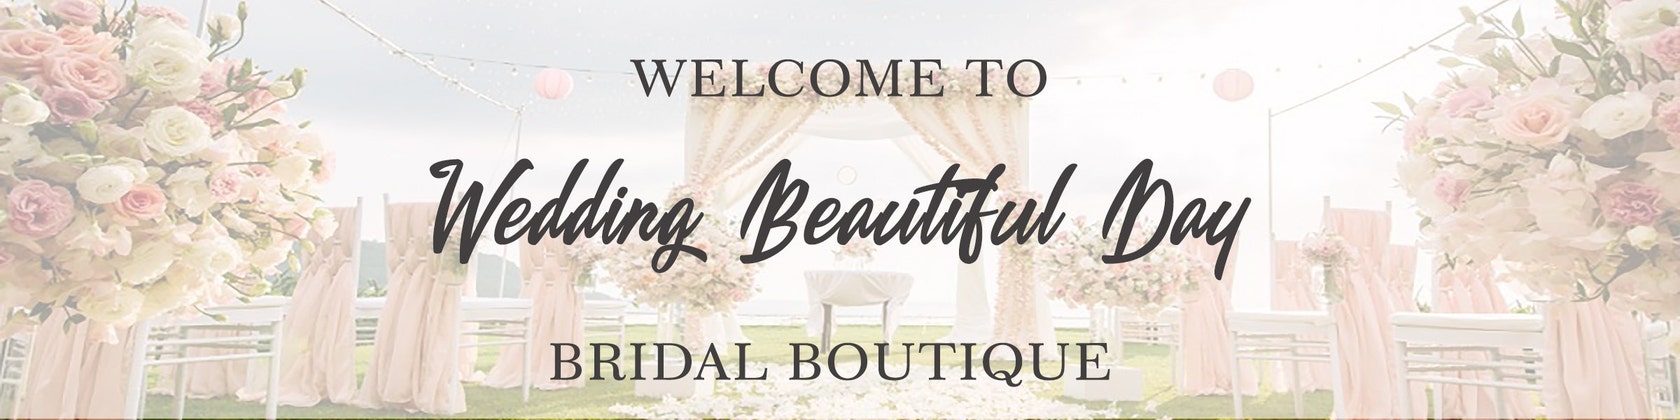 beautiful day wedding boutique